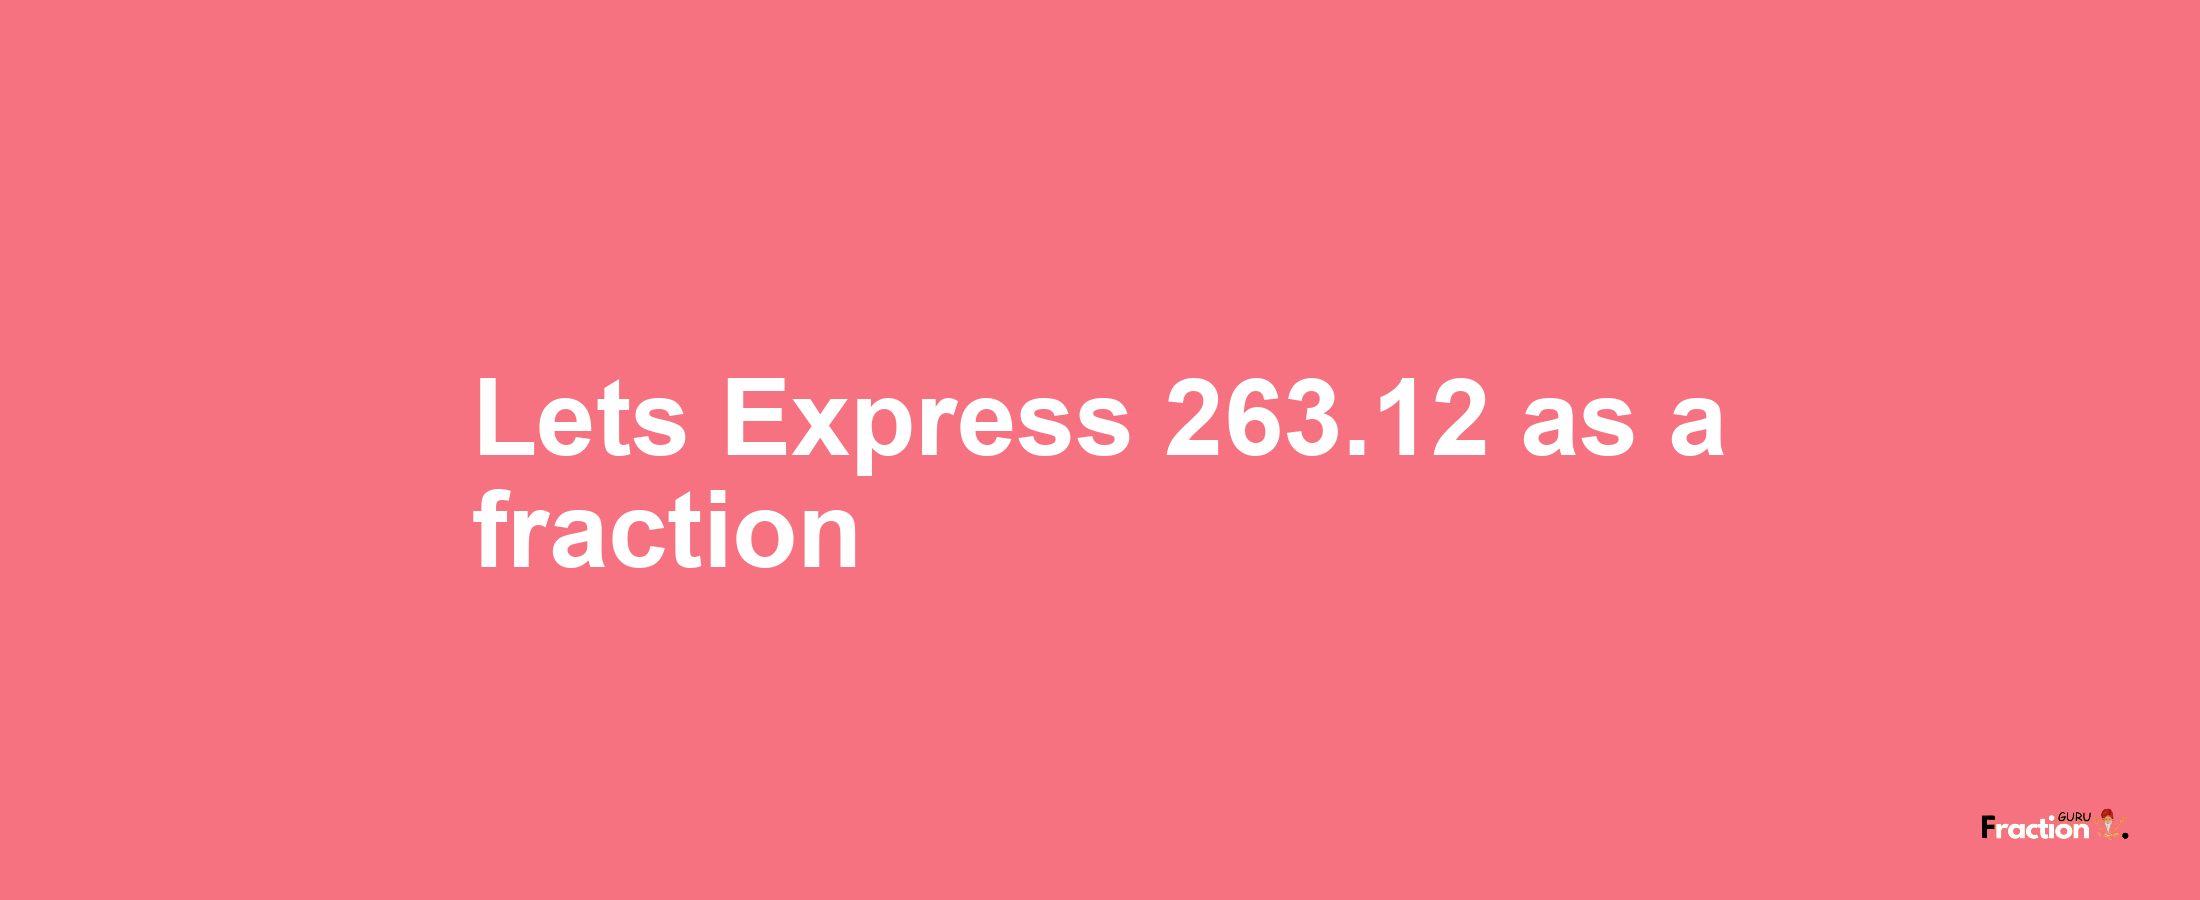 Lets Express 263.12 as afraction